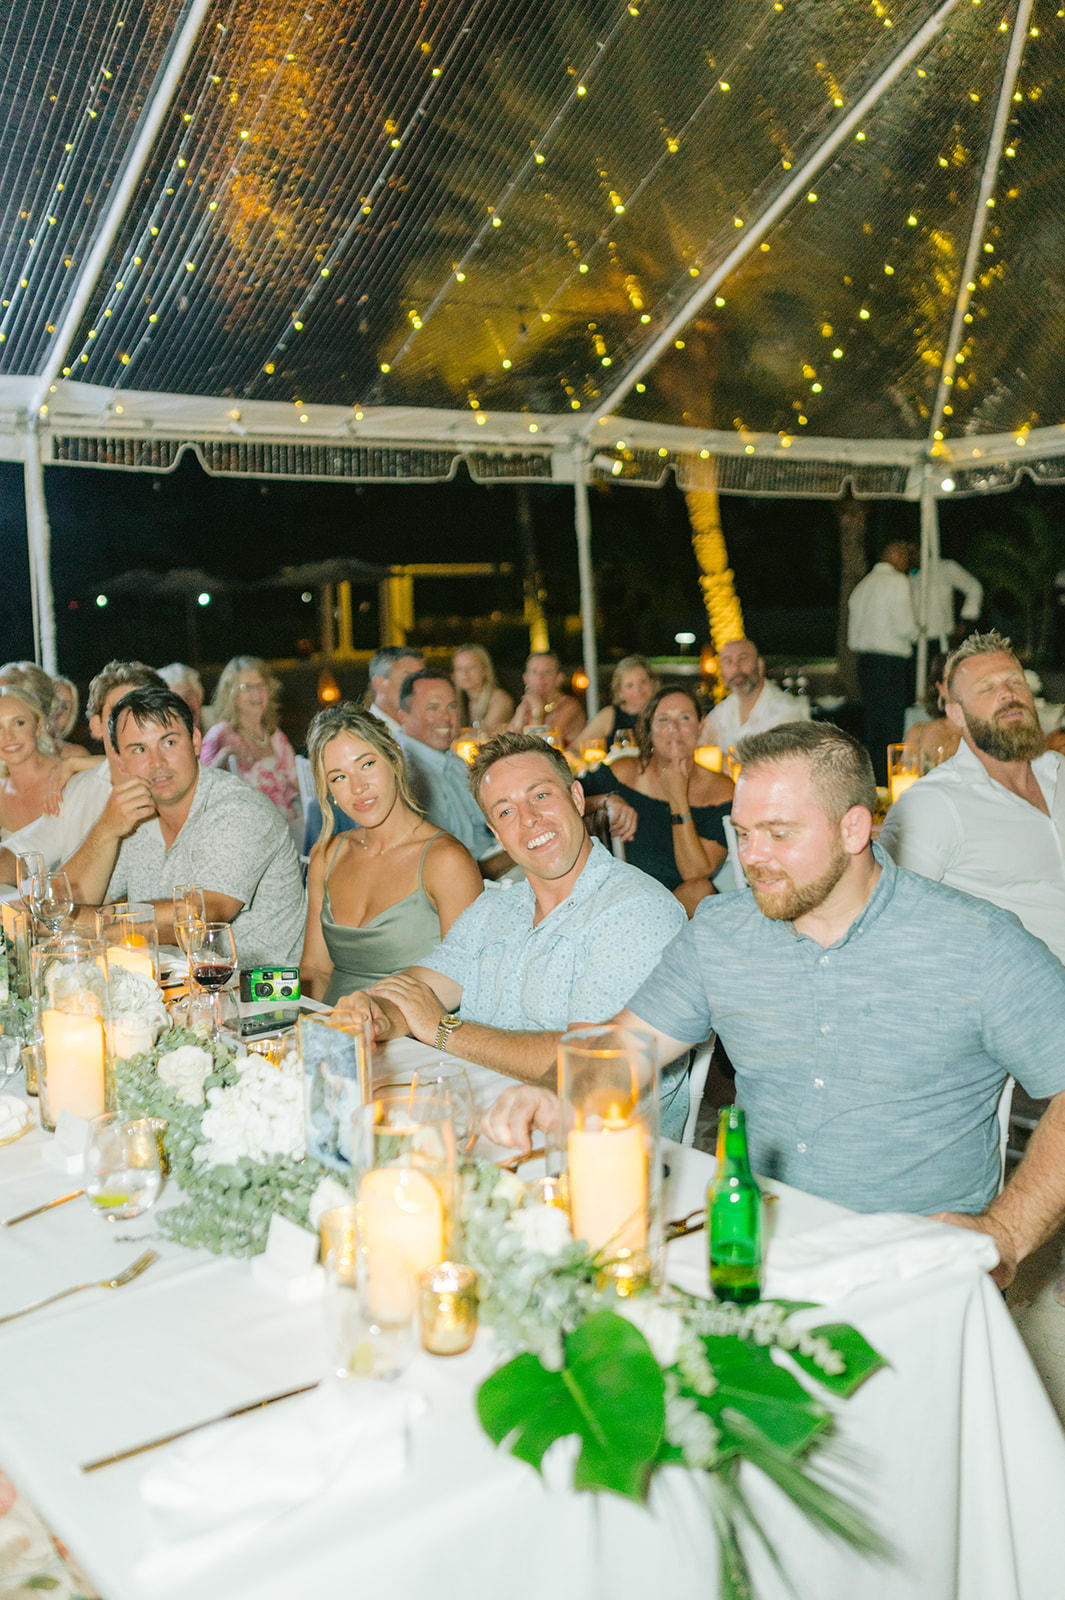 Antigua wedding photographer captures the perfect moment of the first kiss